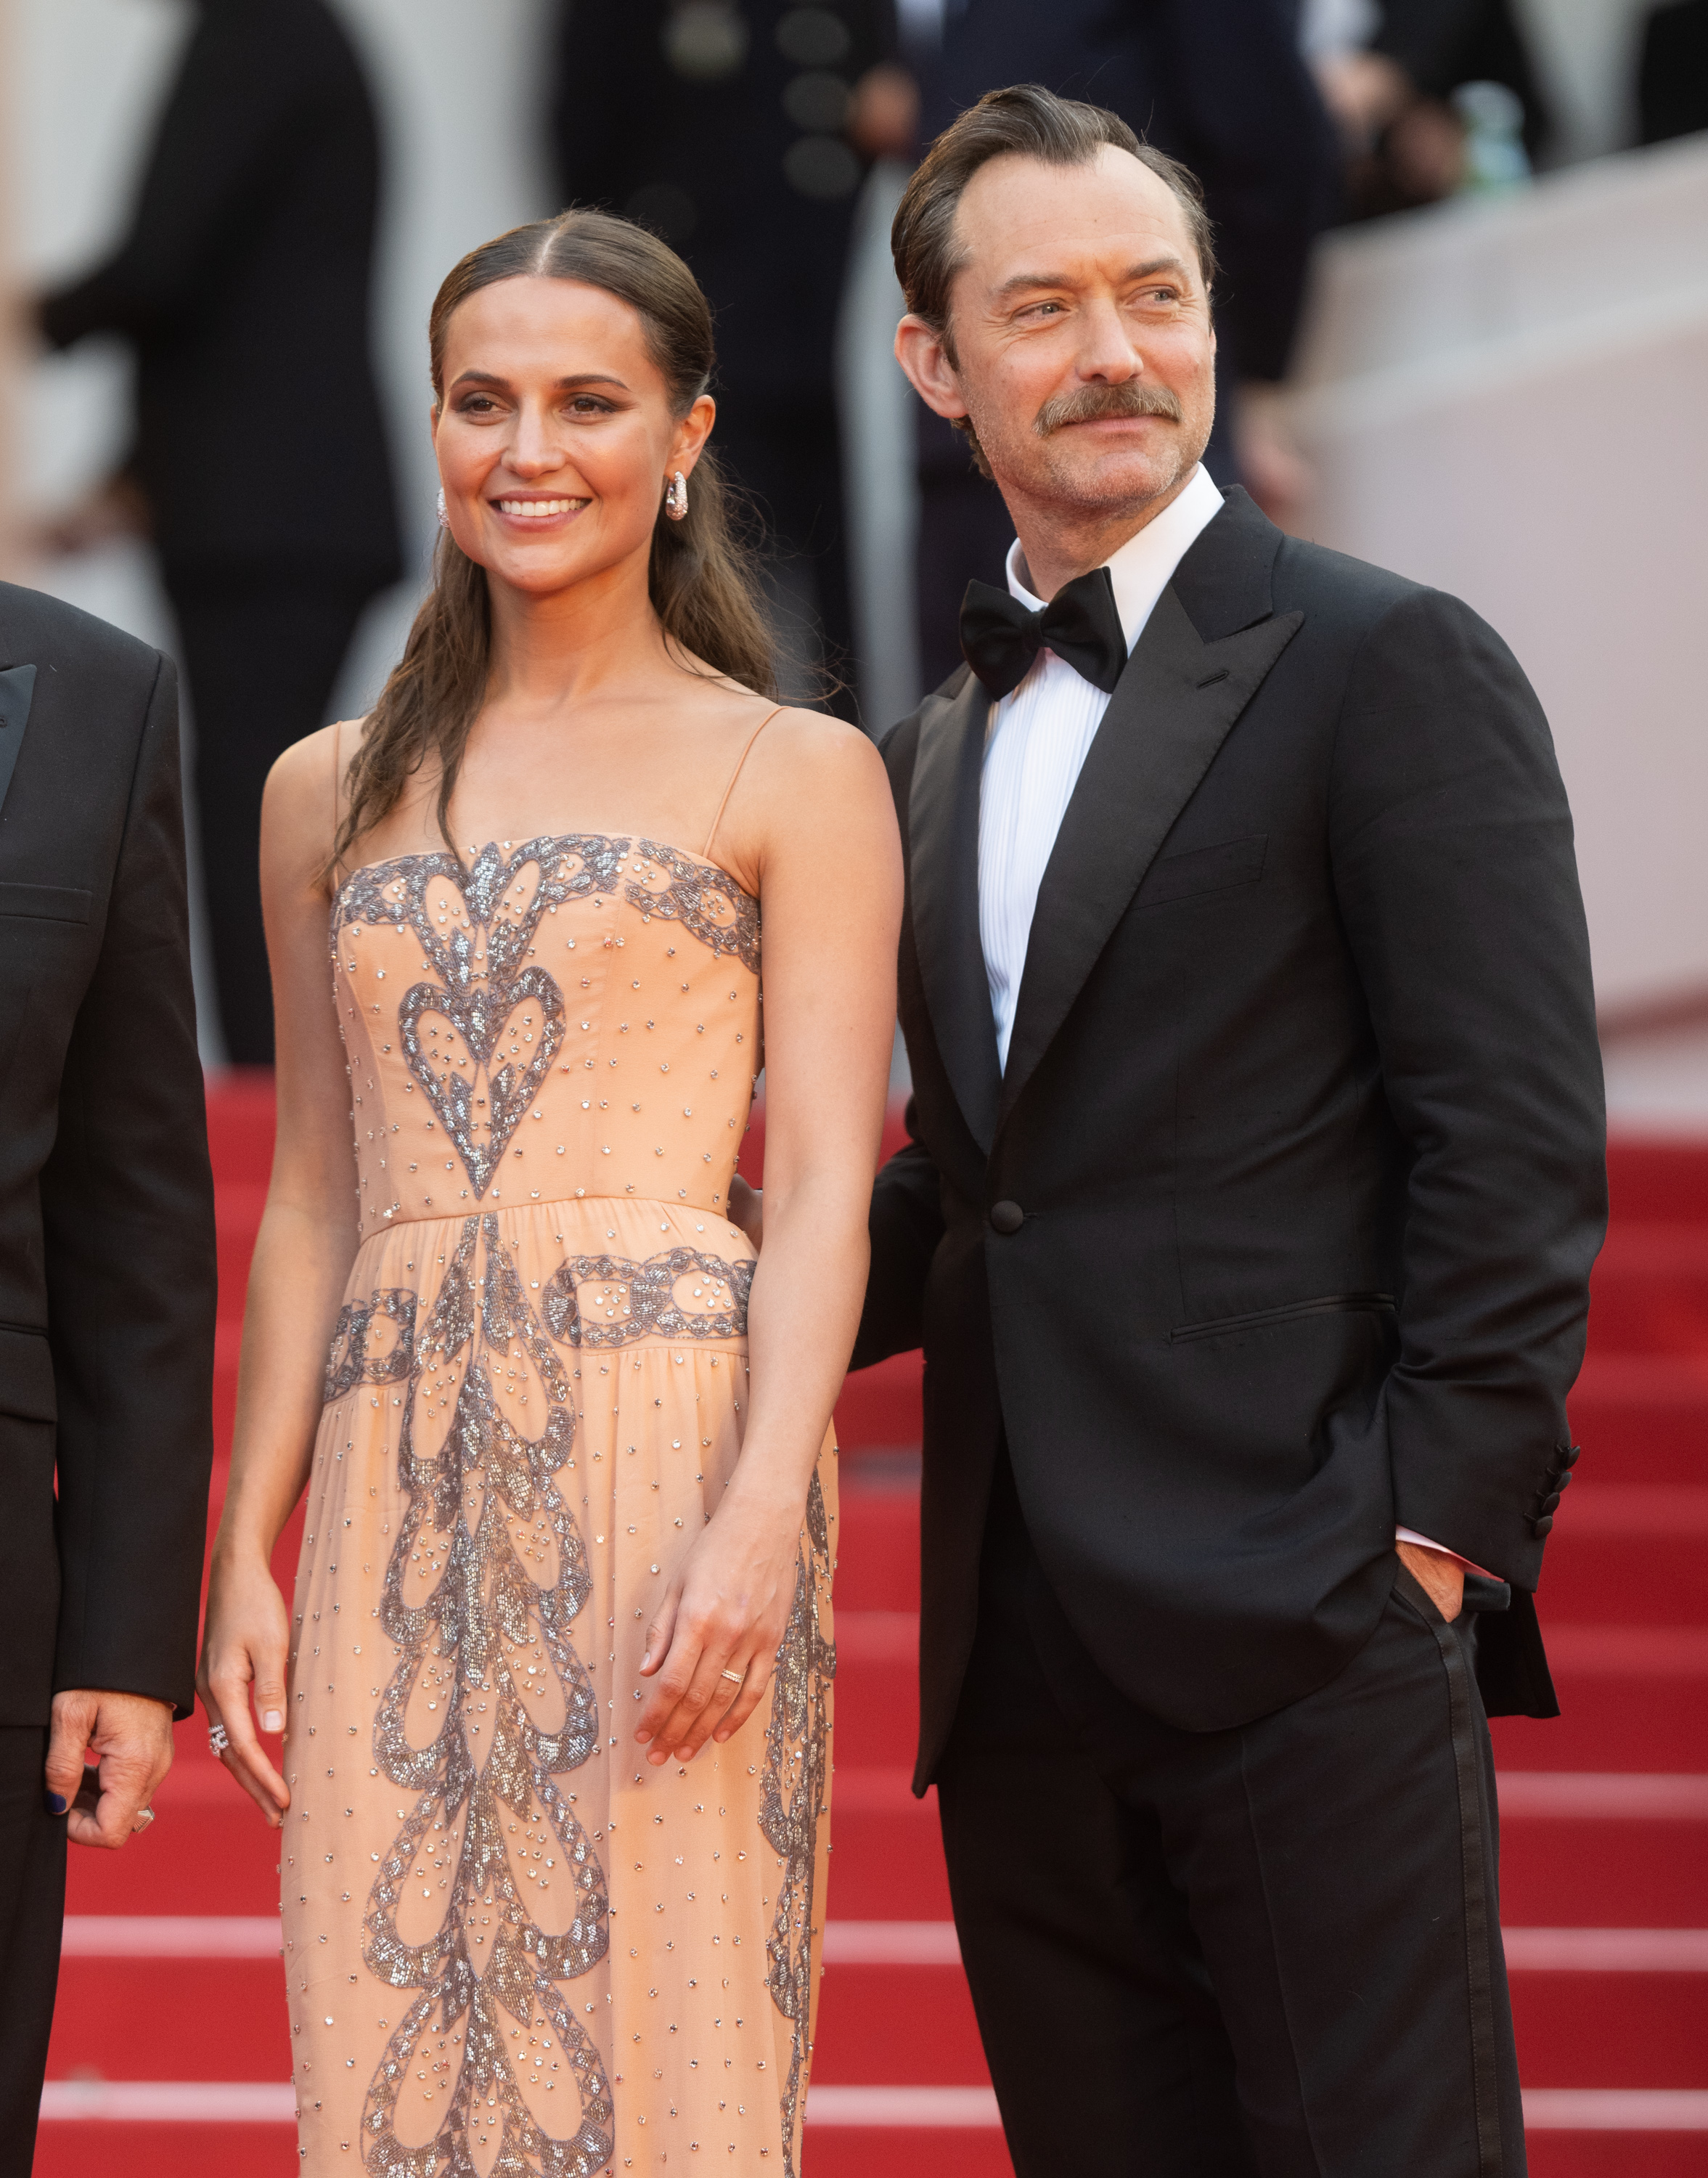 Michael Fassbender and Alicia Vikander attend screening at Cannes Film  Festival